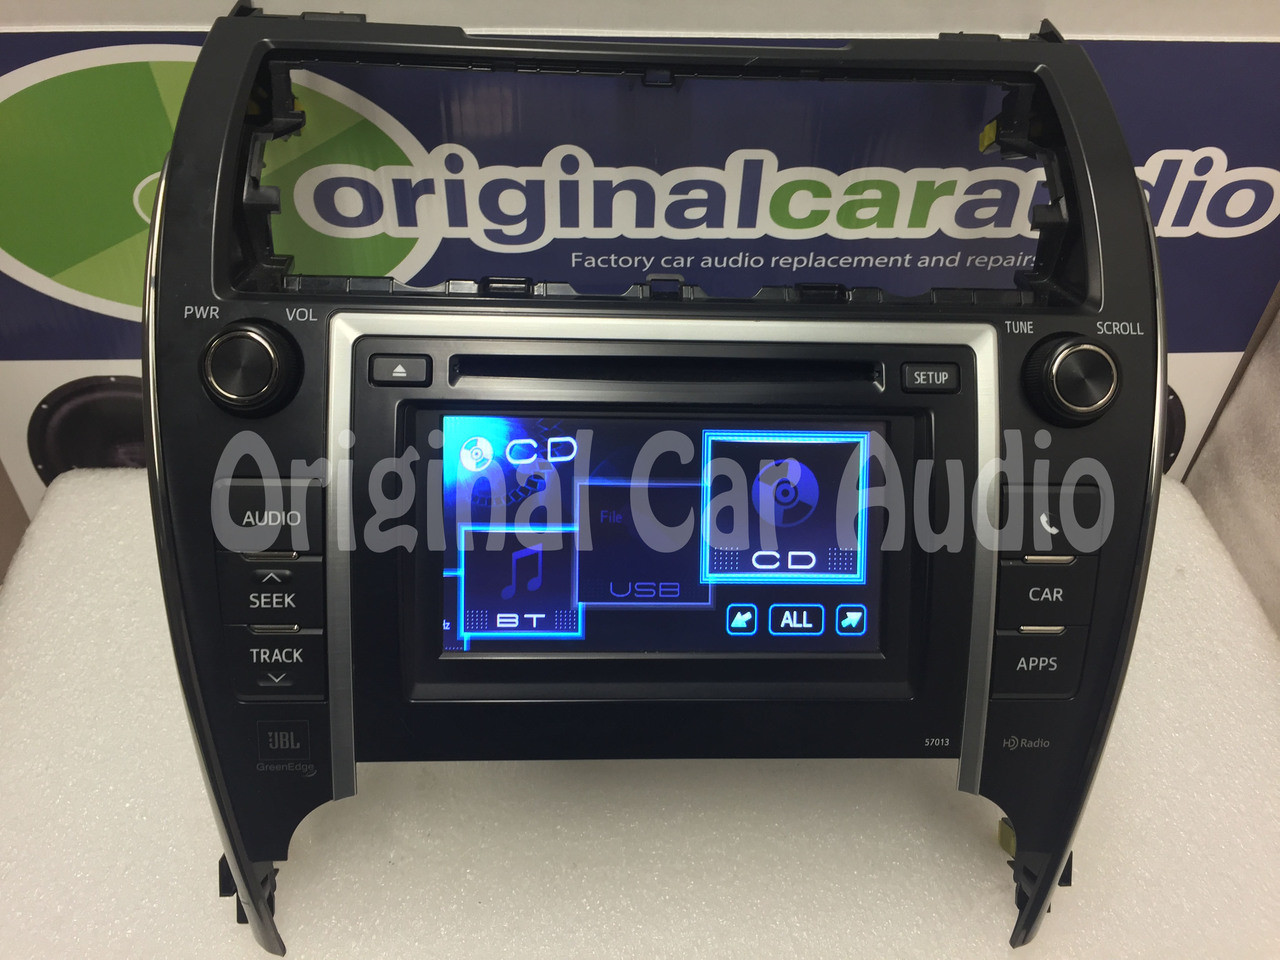 12 13 Toyota CAMRY Touch Screen Display LCD Radio MP3 XM CD Changer Player 57012